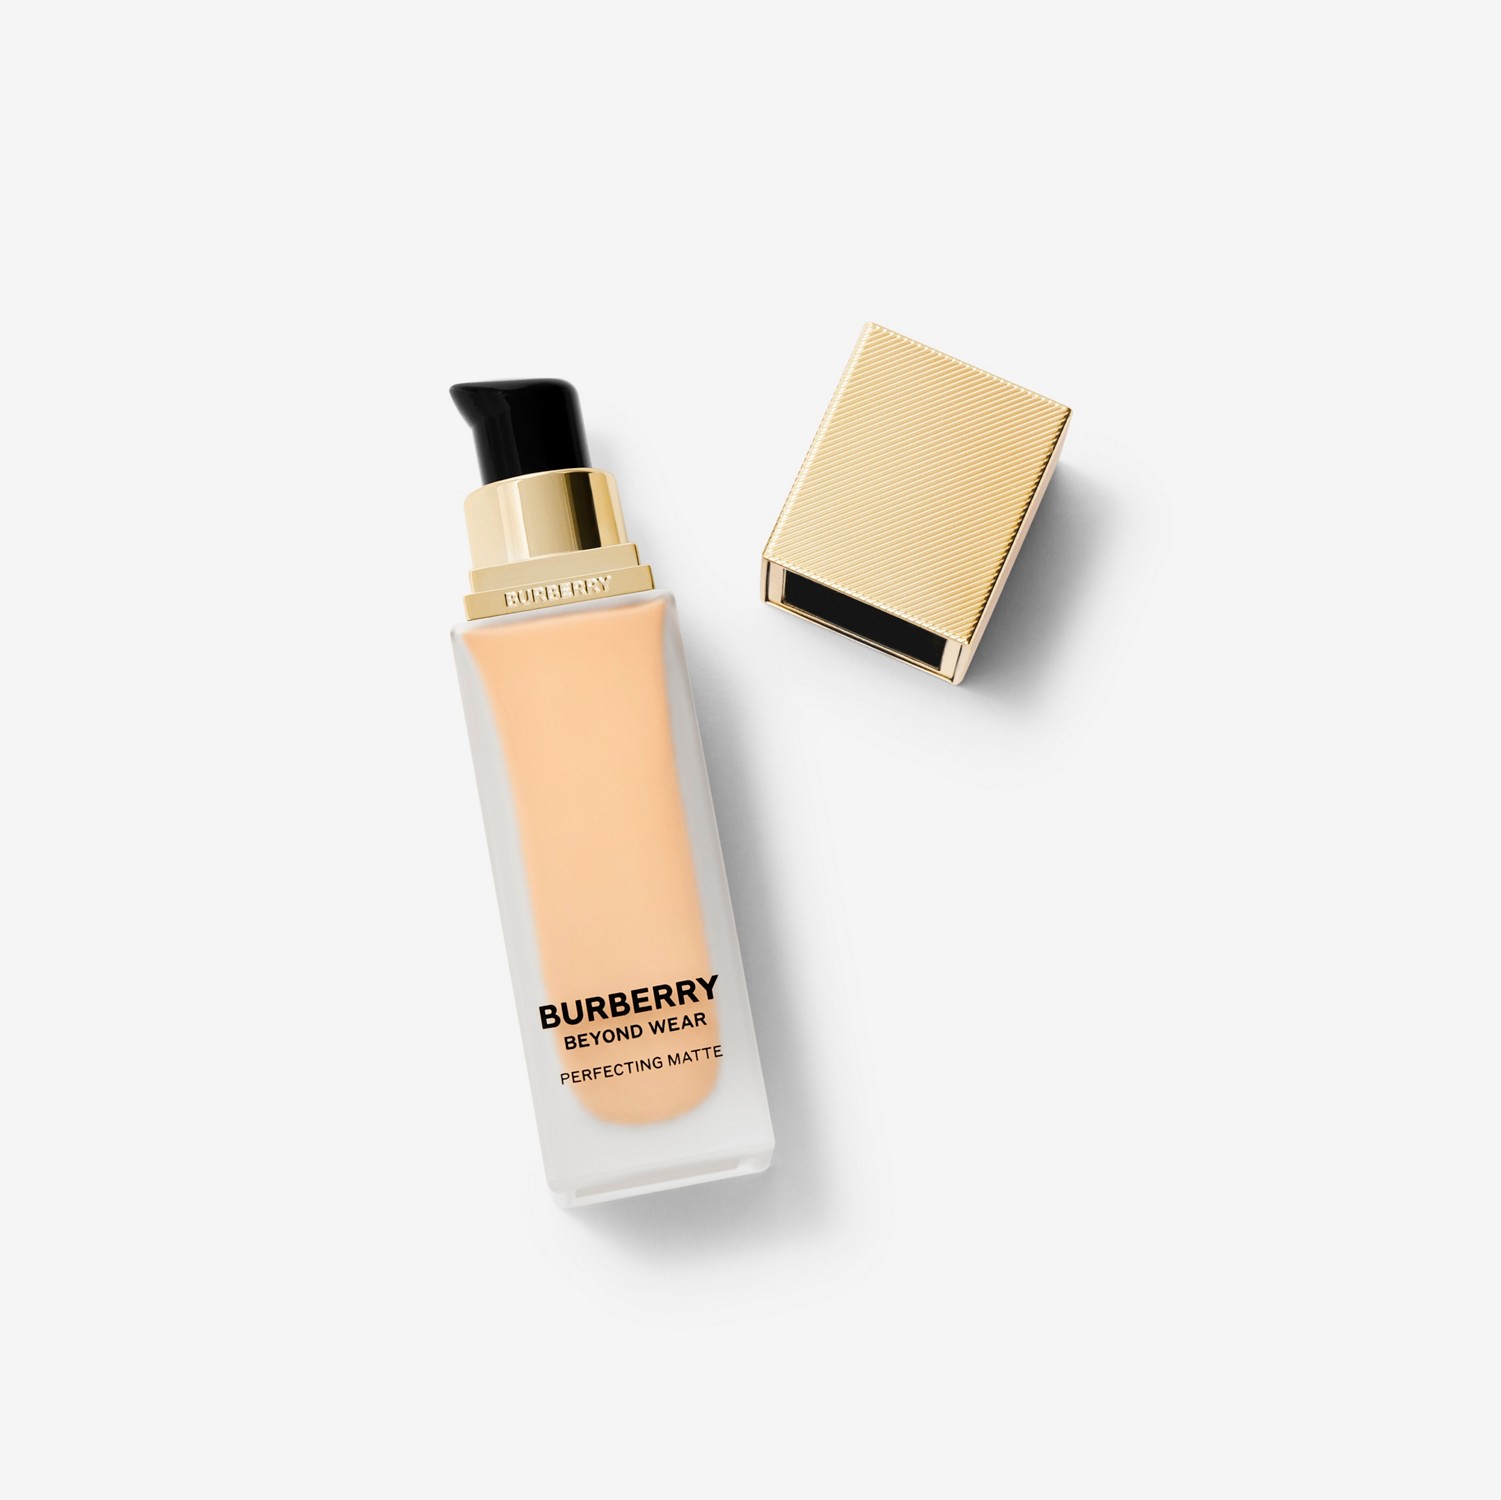 Beyond Wear Perfecting Matte Foundation – 20 Fair Warm - Donna | Sito ufficiale Burberry®